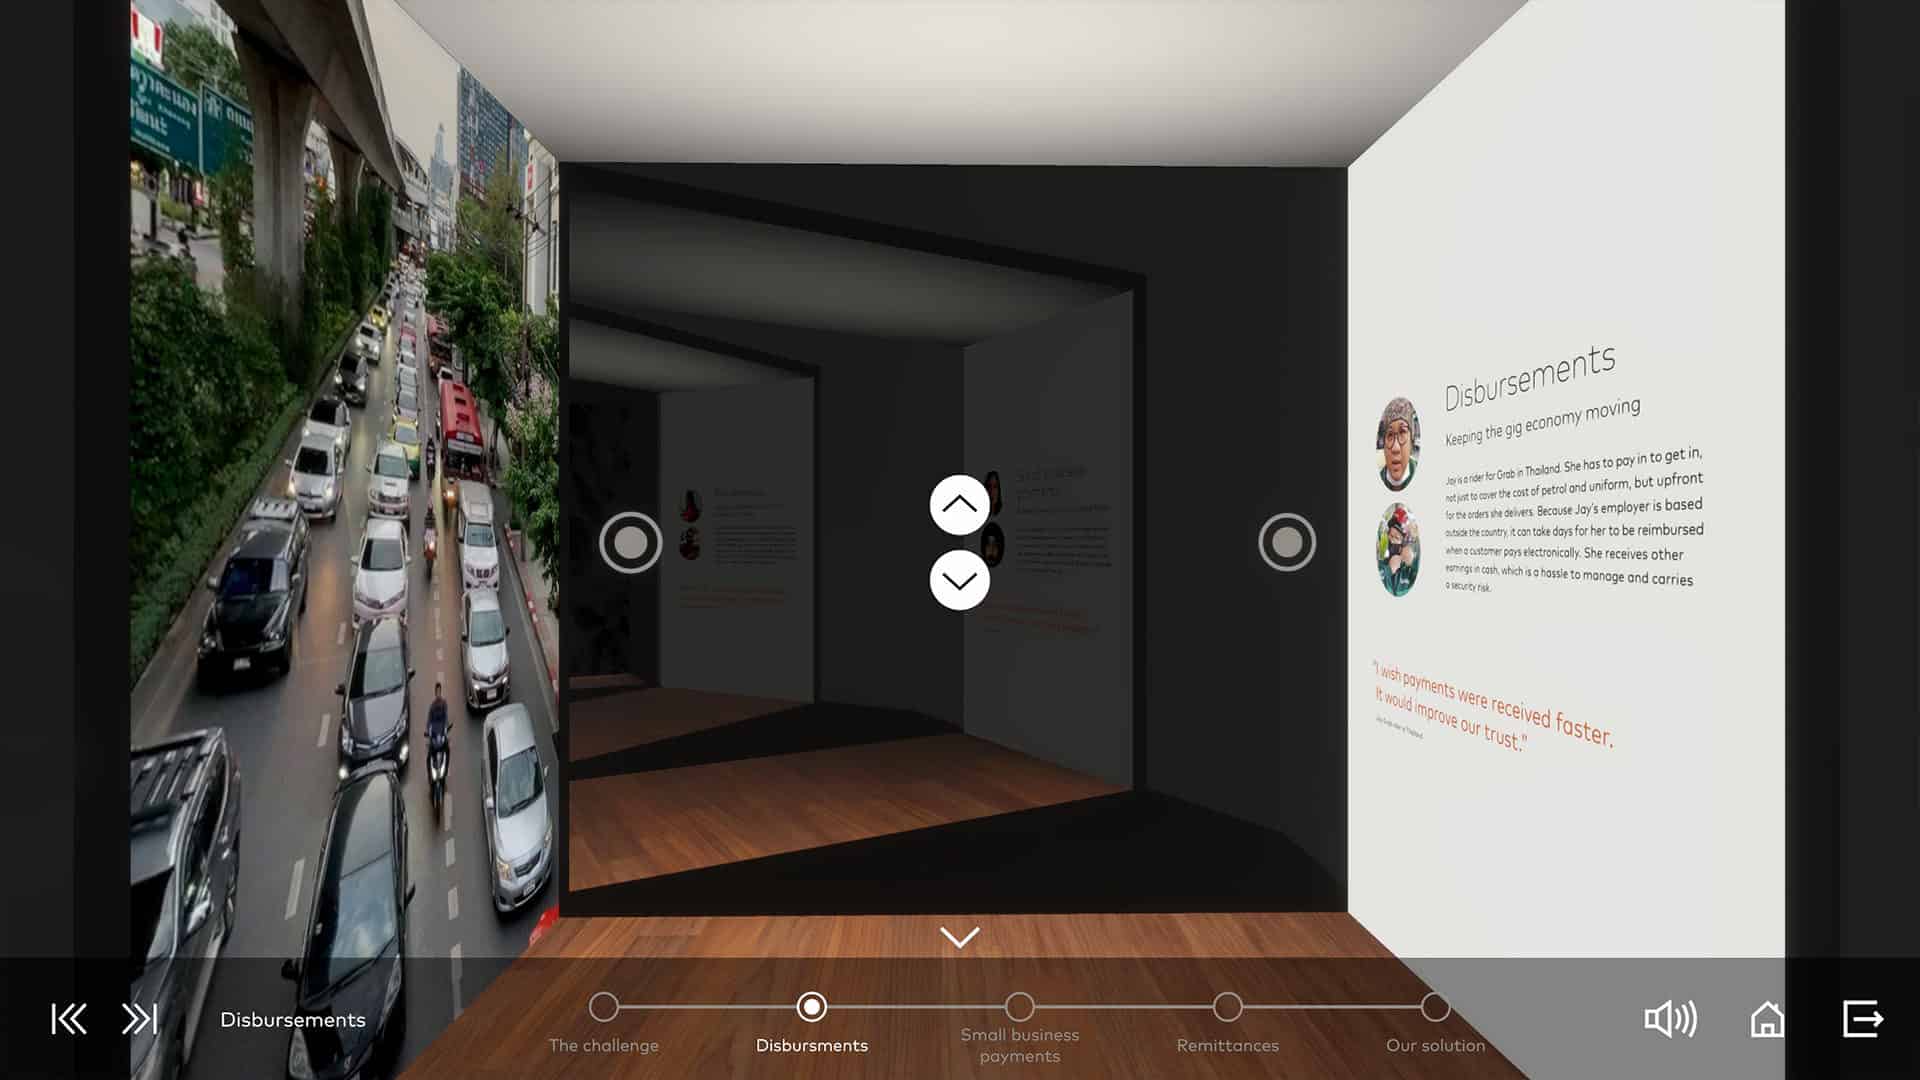 Inside the Mastercard virtual exhibition space.